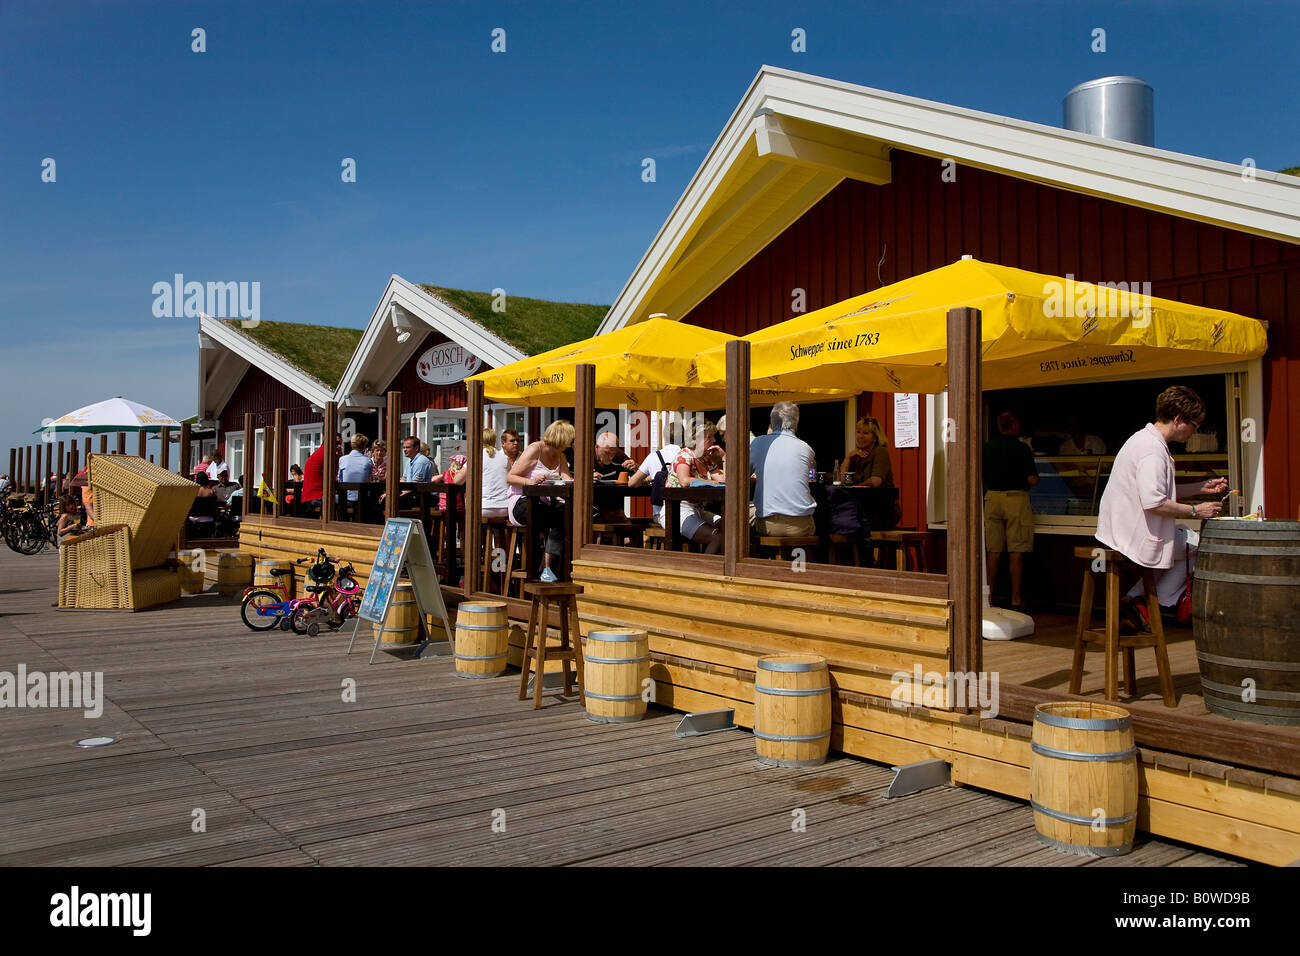 Gosch Fish Restaurant on the sea front of Sankt Peter-Ording, North Frisia, Schleswig-Holstein, Germany, Europe Stock Photo